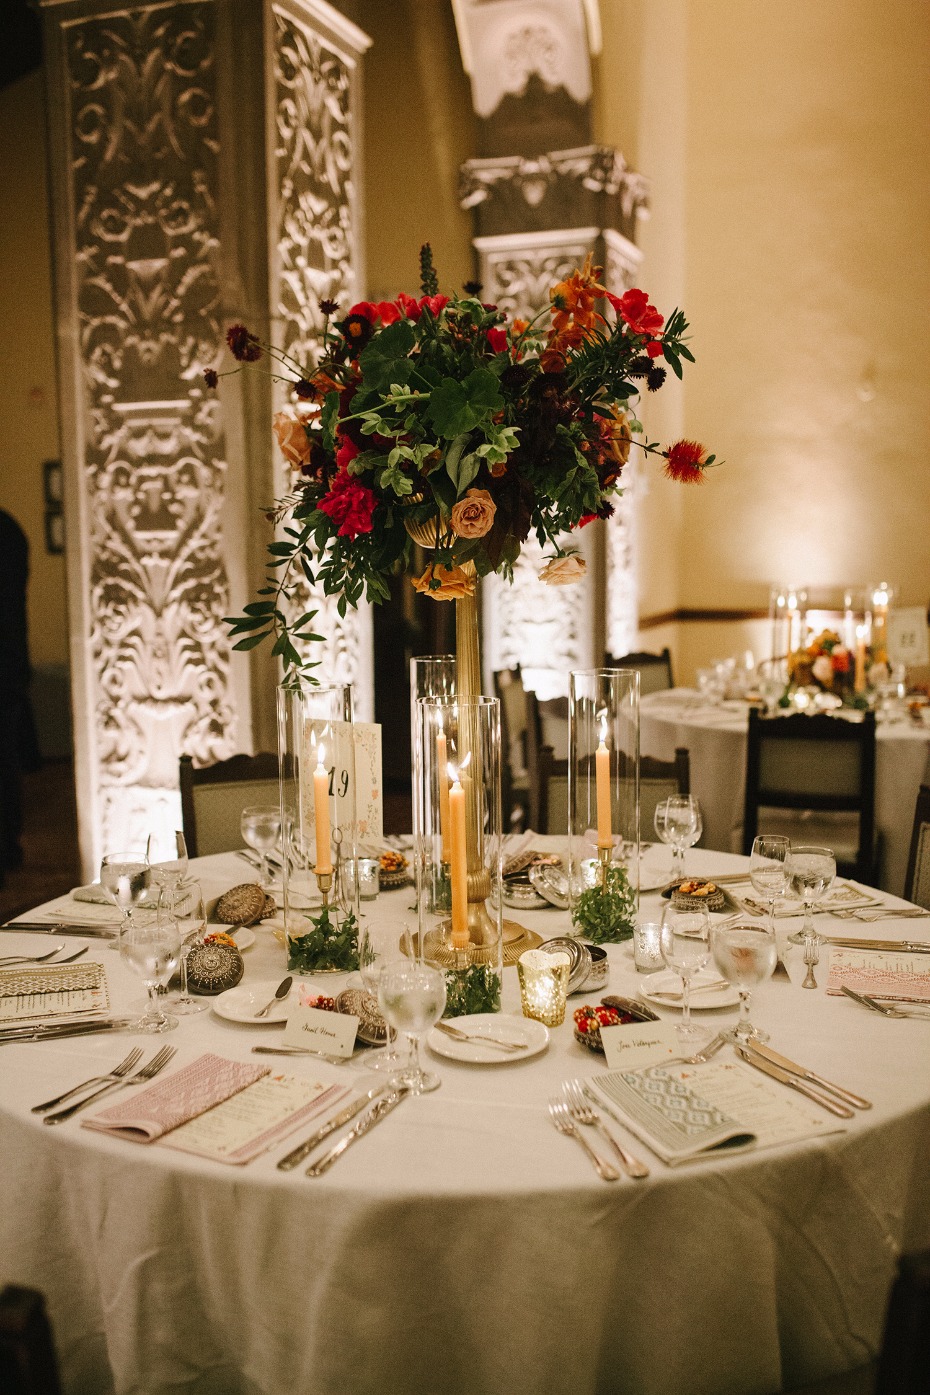 Tall floral centerpiece with candles